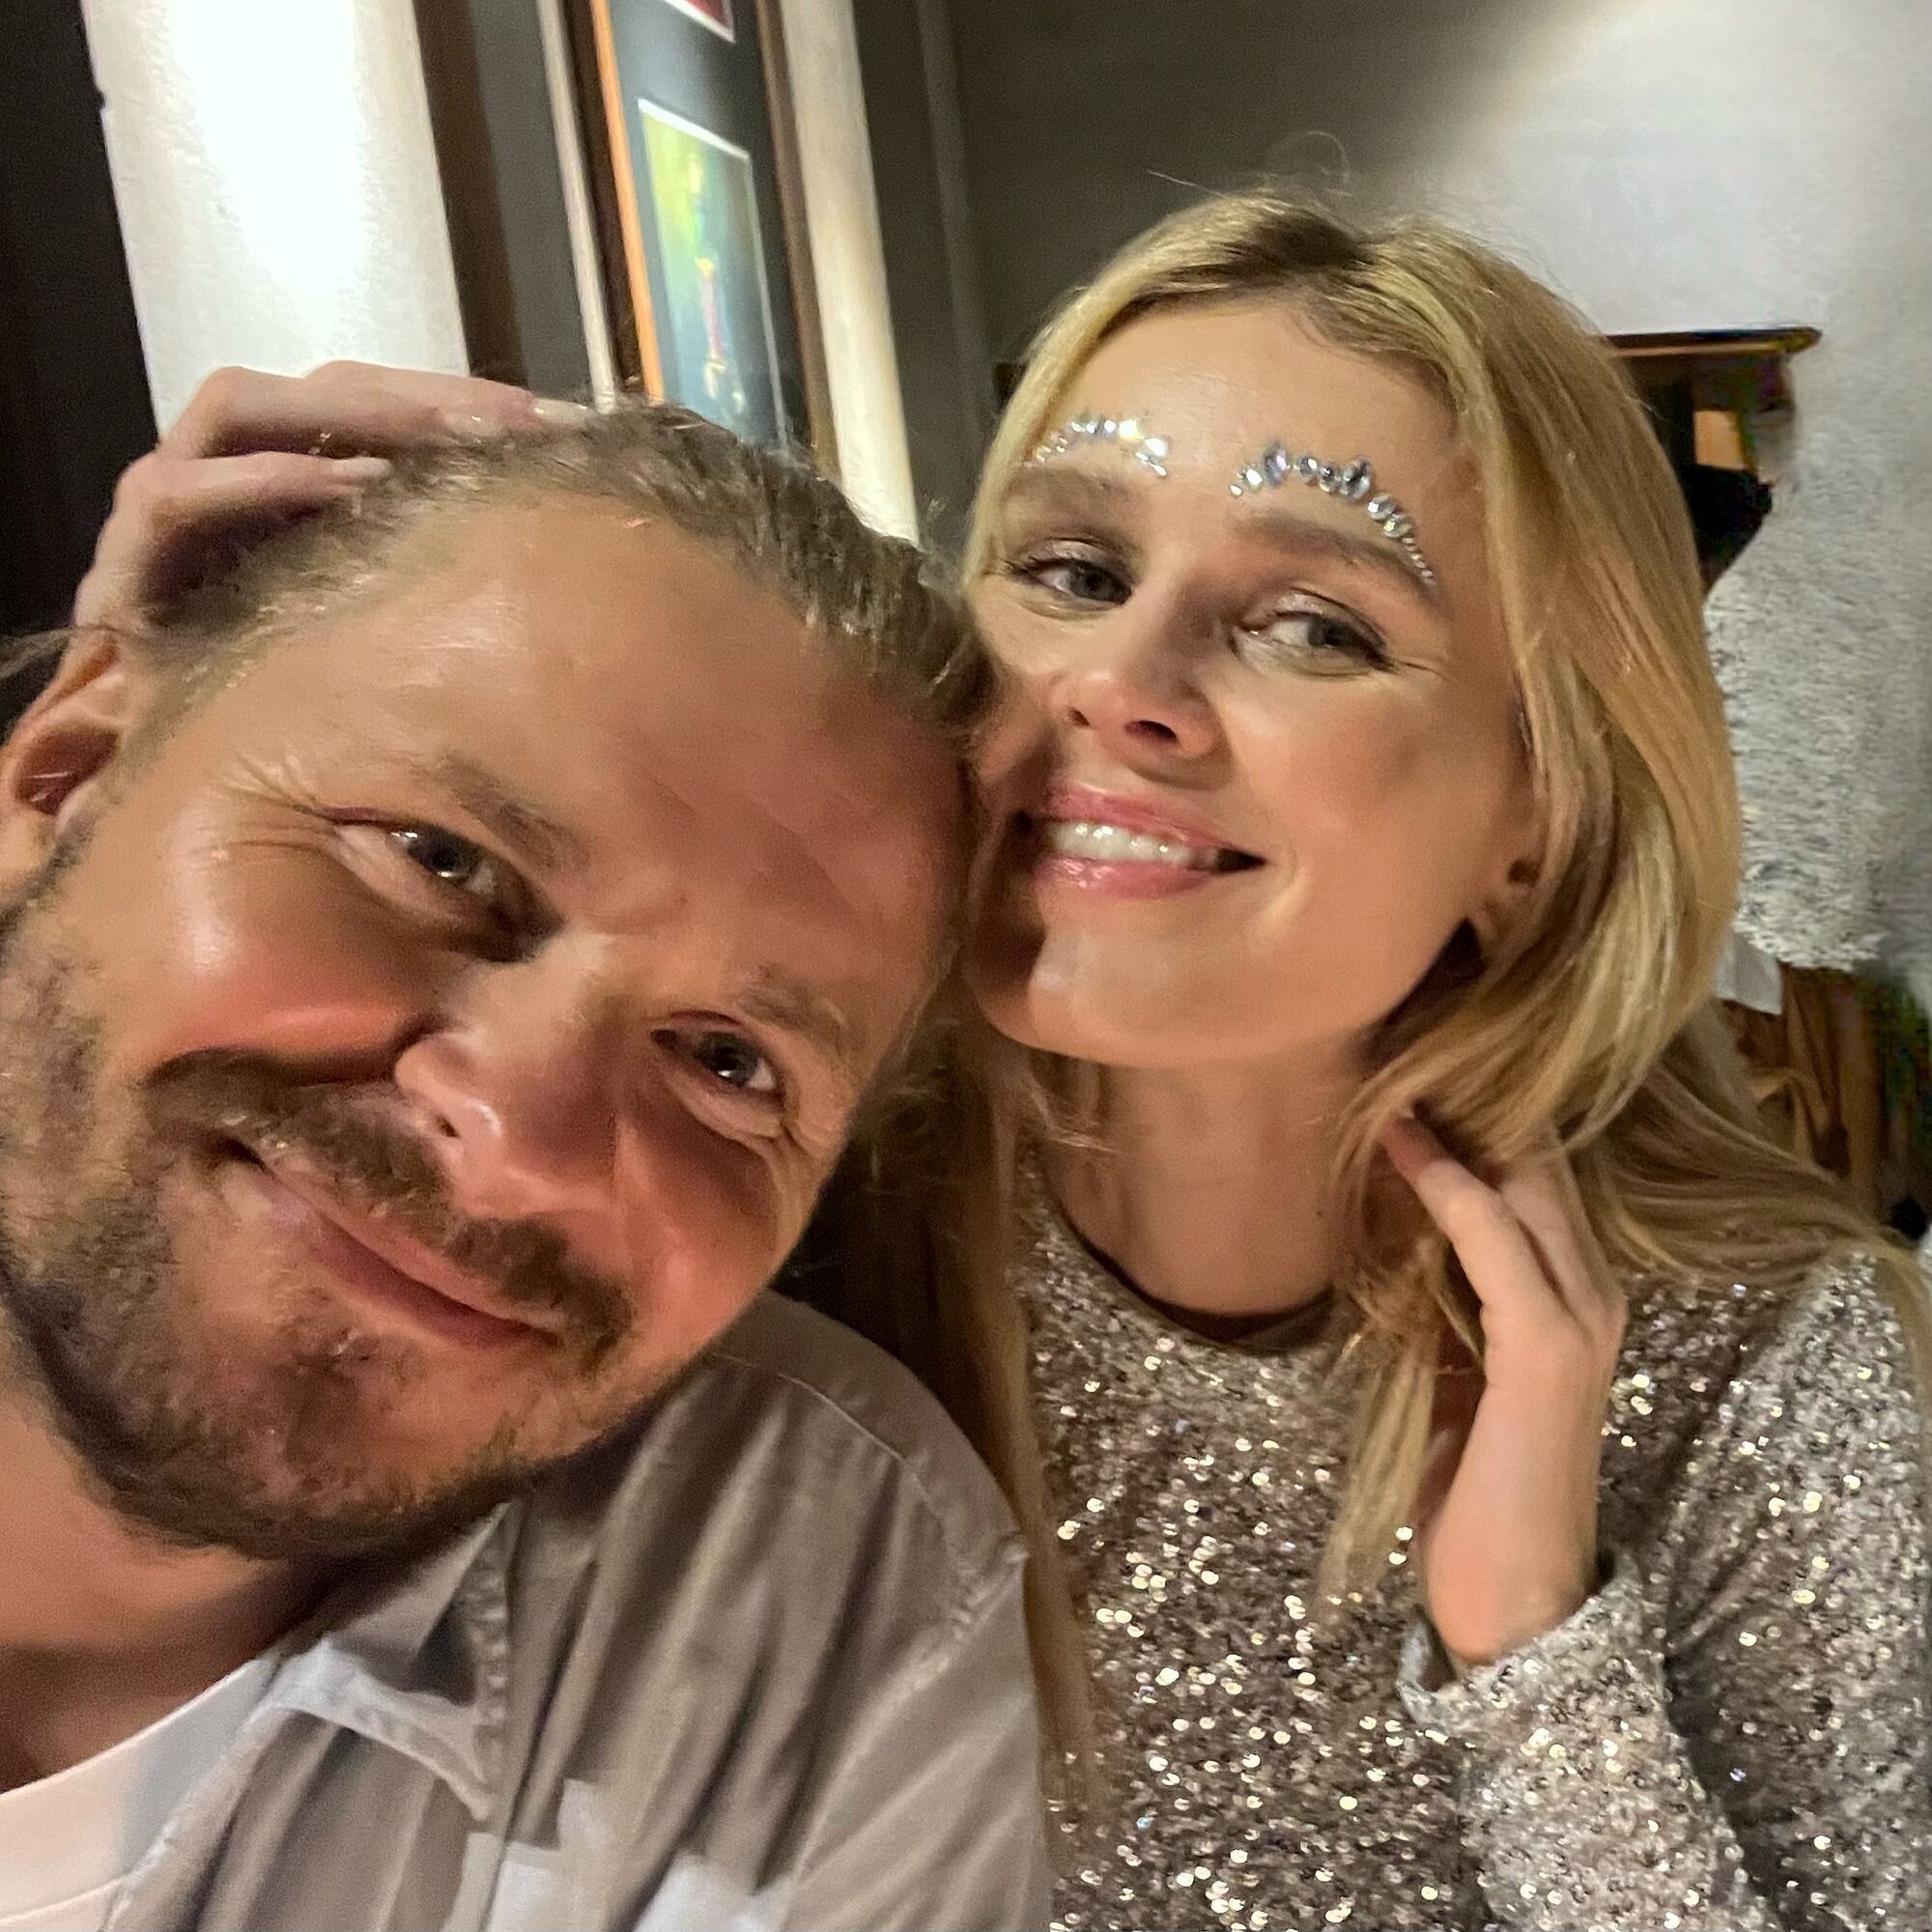 Love is not about flowers and gifts. Bednyakov, Tarabarova, Monroe and other stars showed their ''Valentine'' on February 14